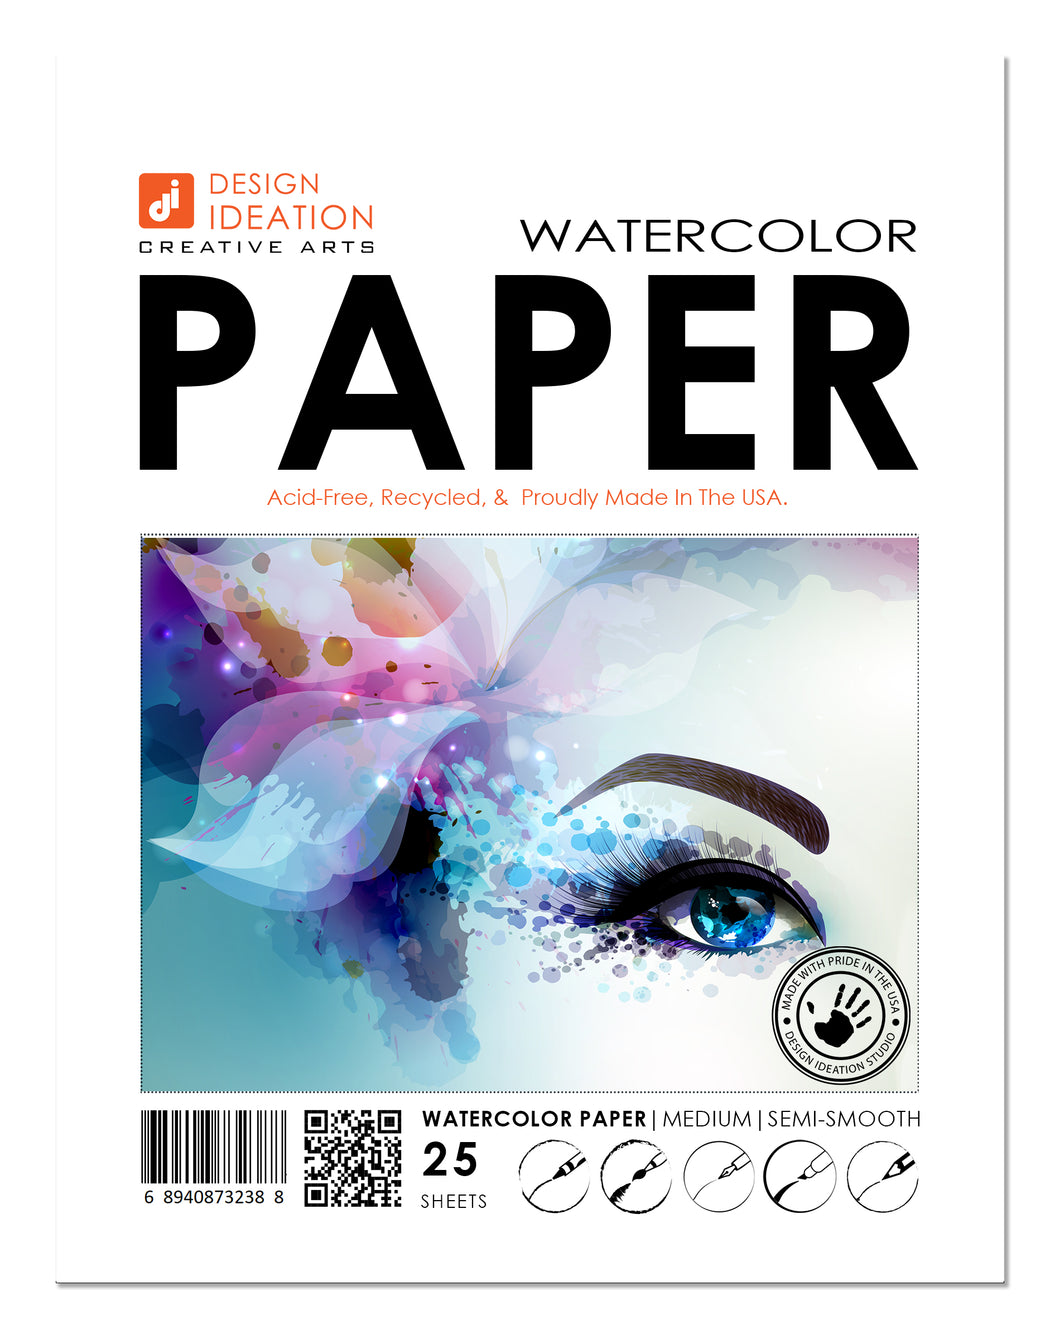 WATERCOLOR Paper : Multi-media paper sheets for pencil, ink, marker and watercolor paints. (8.5